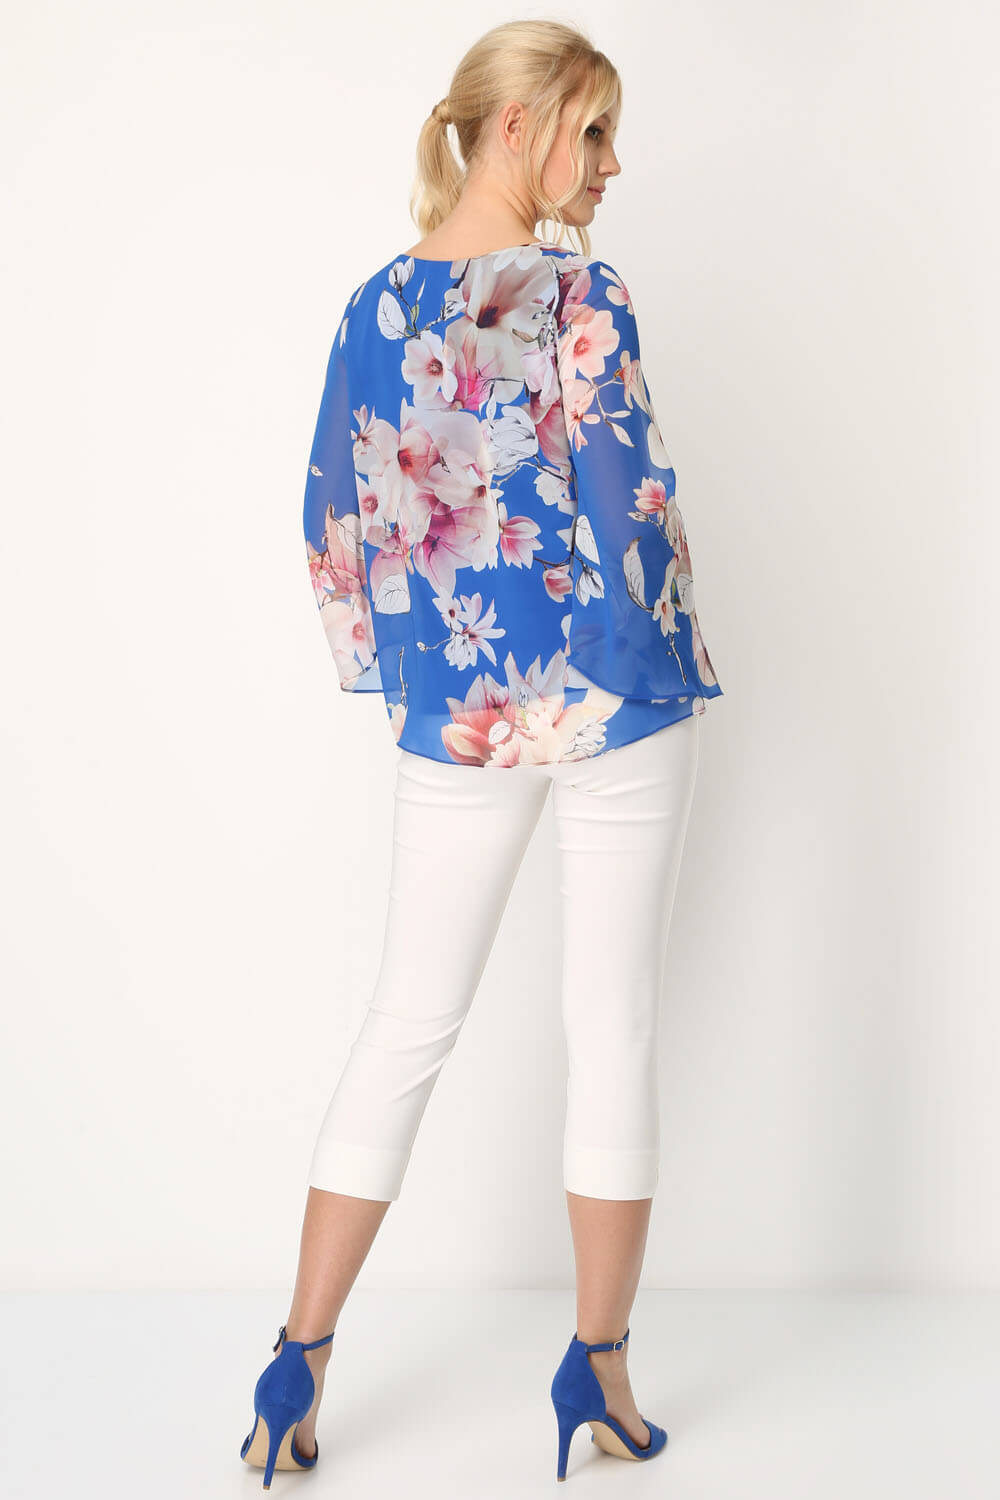 Royal Blue Floral Chiffon Overlay Top, Image 3 of 8